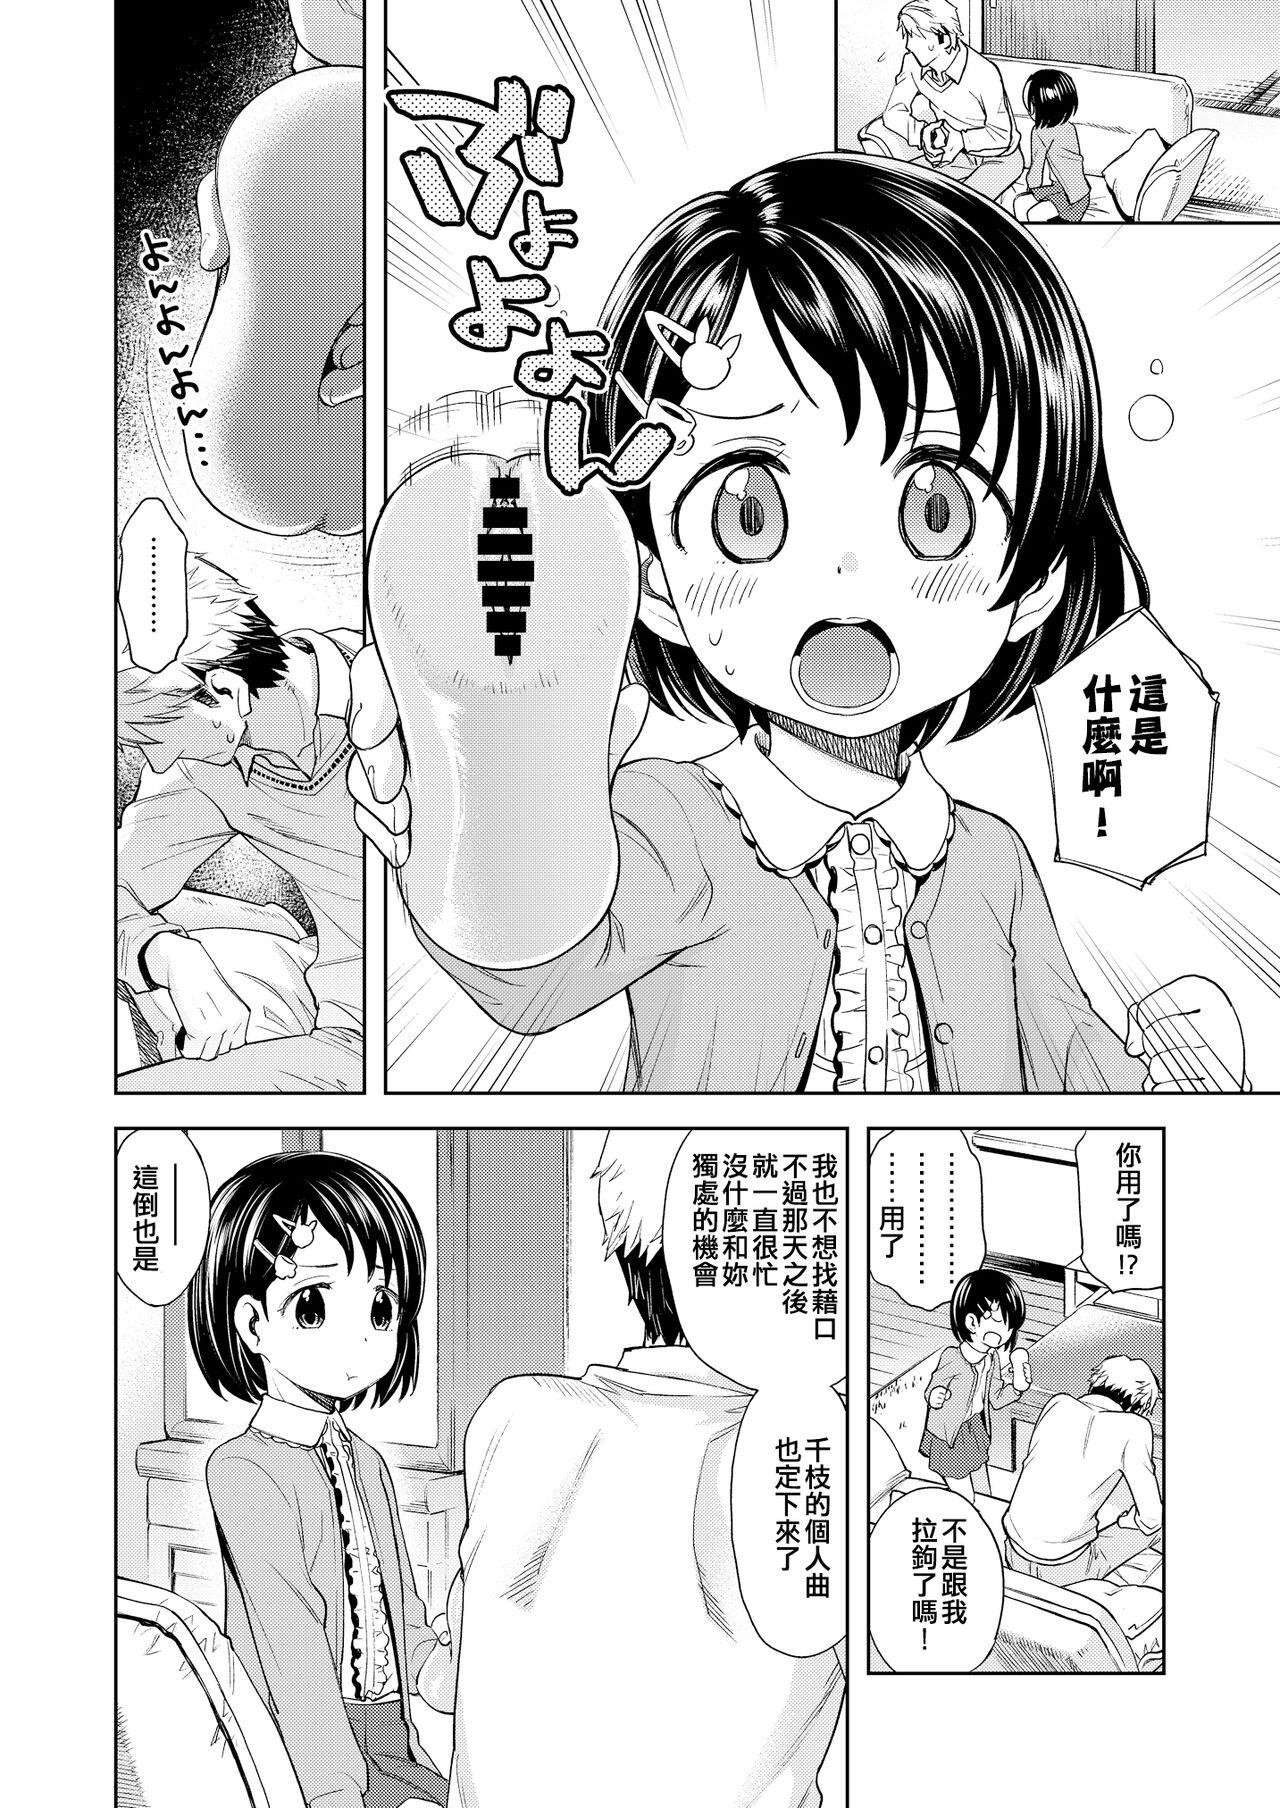 Hole Warui Ko Chie-chan 3 - The idolmaster For - Page 6